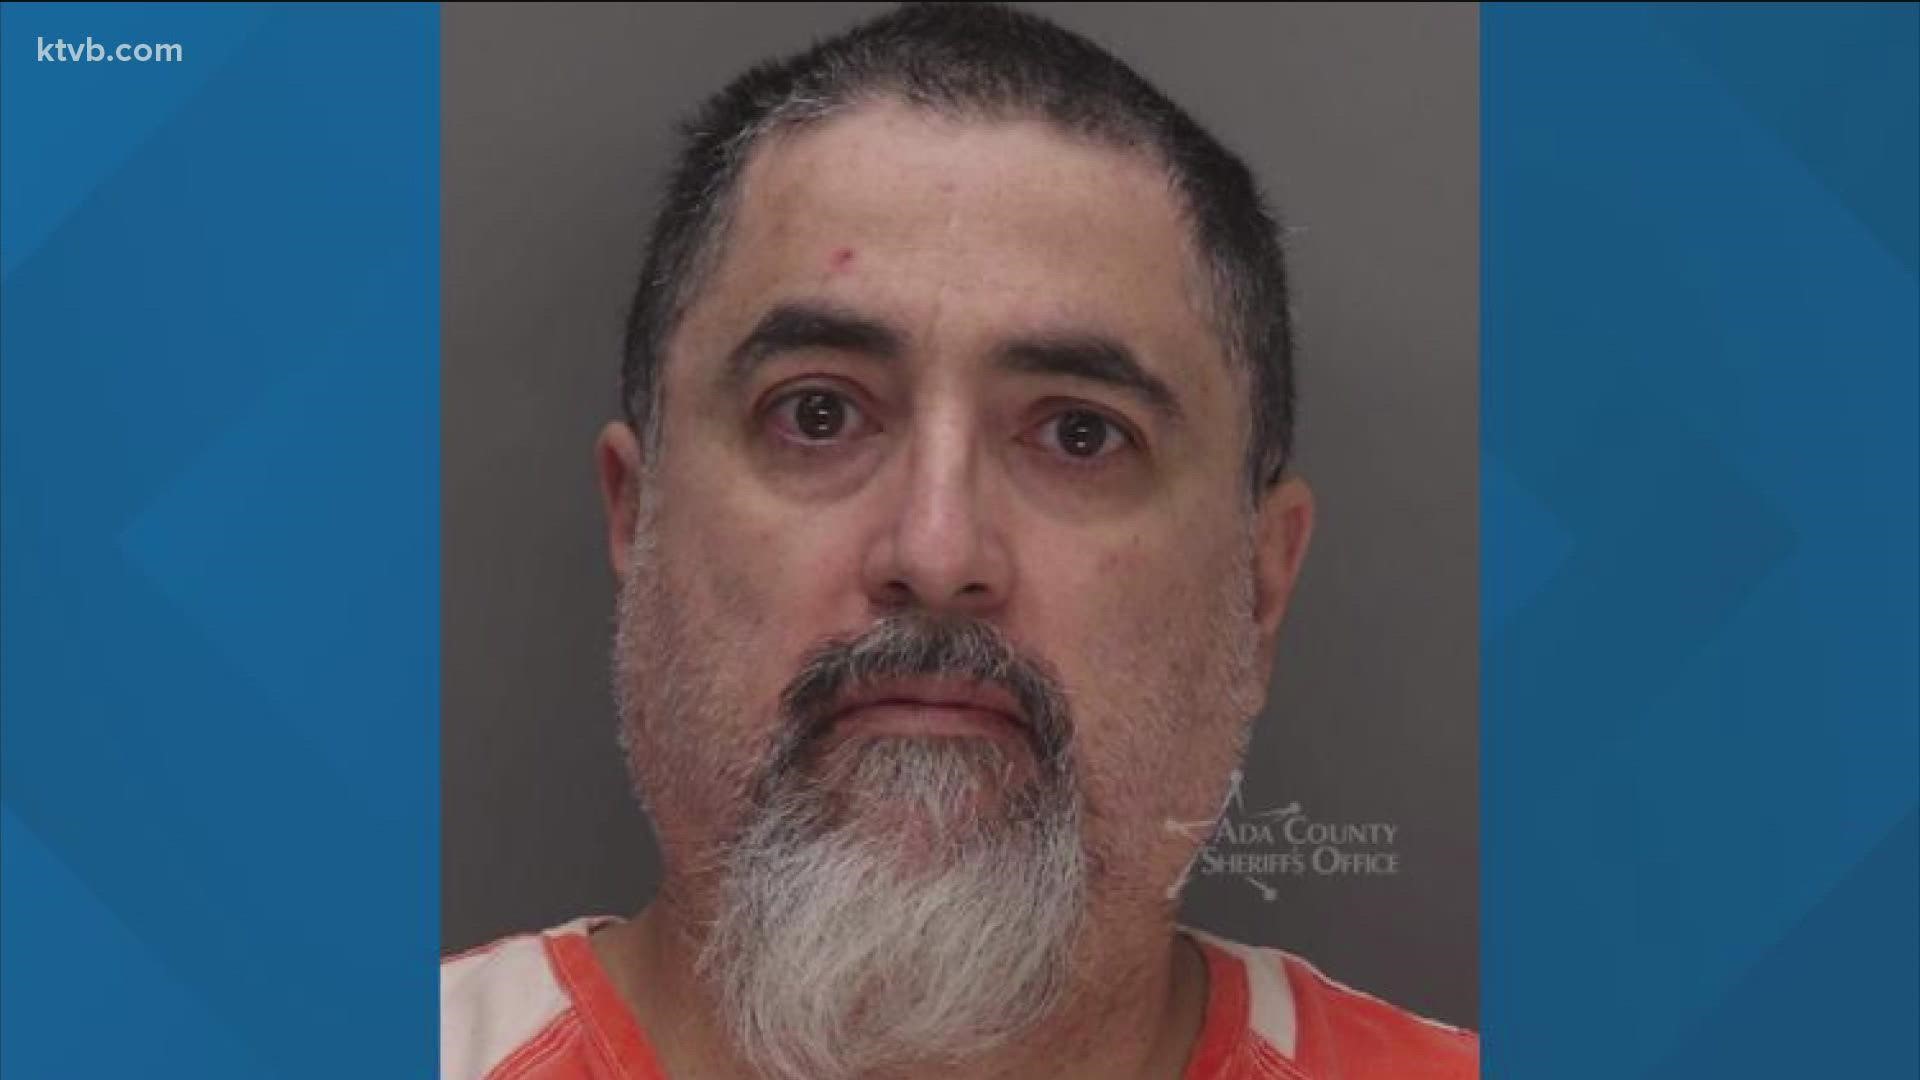 Prosecutors say 49-year-old Joel Guerrero forced his way into a woman's home, tied her up, and sexually assaulted her.